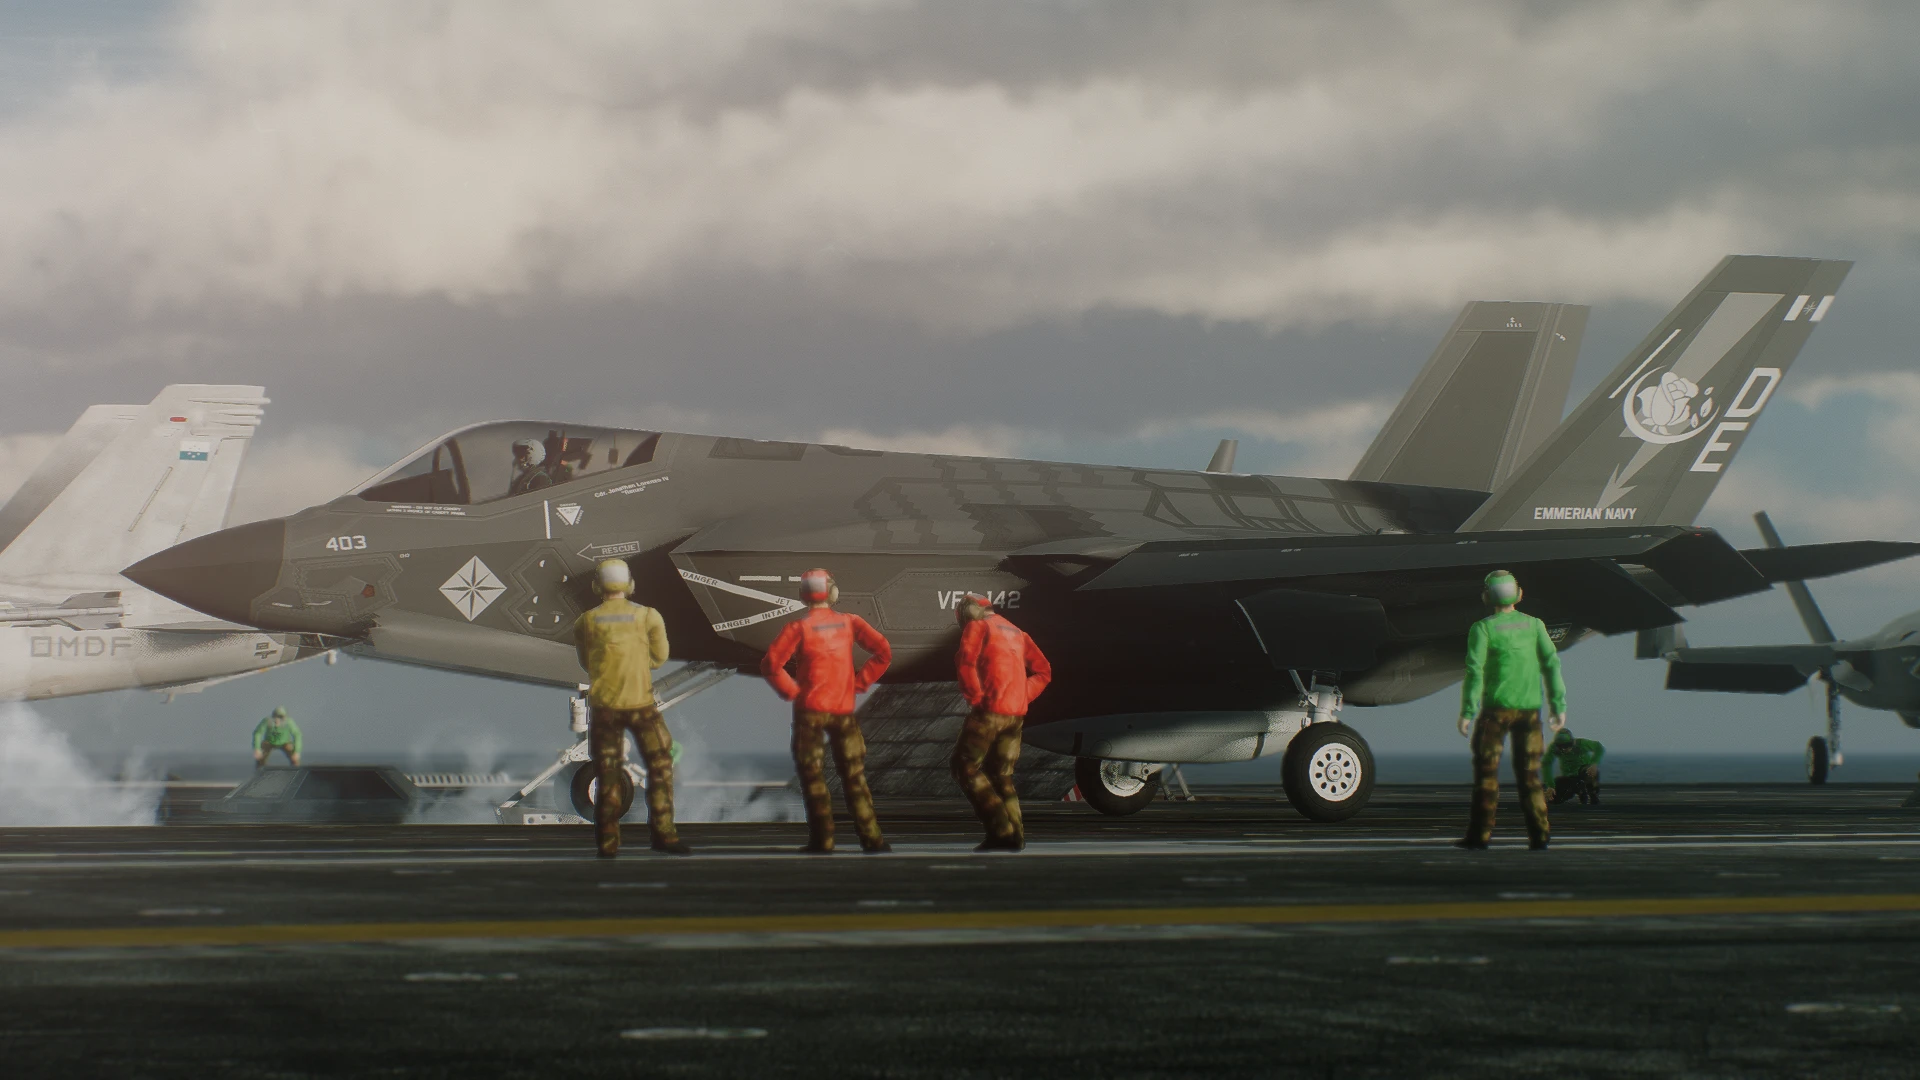 Ace Combat 7: Modders Add SU-75 Stealth Fighter to Campaign Before Many  Have Seen it IRL - autoevolution